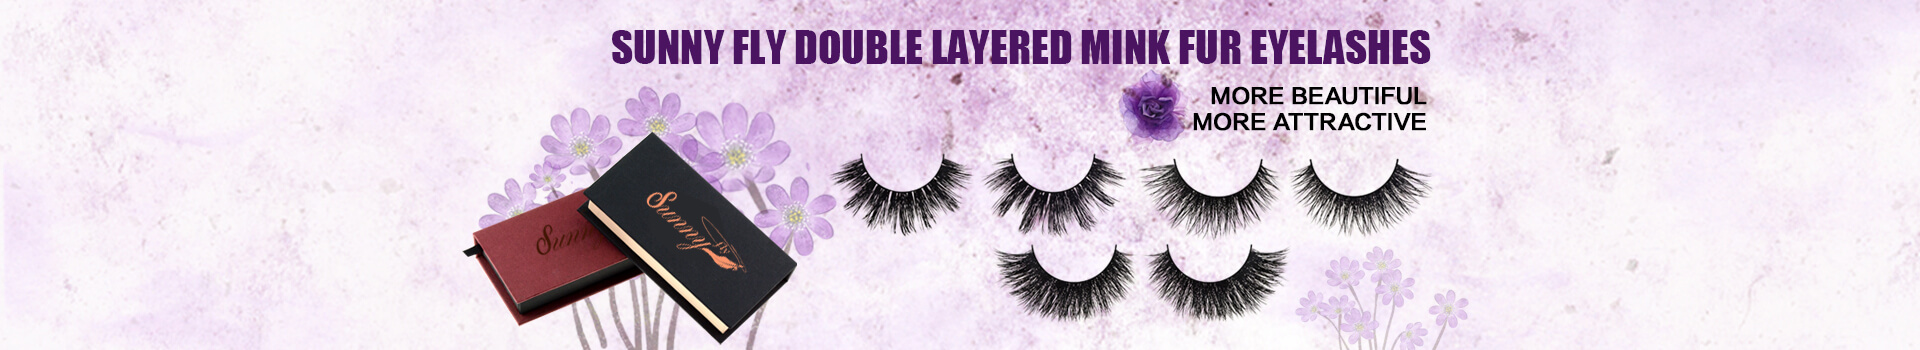 Double Layered Nerz Wimpern MD03